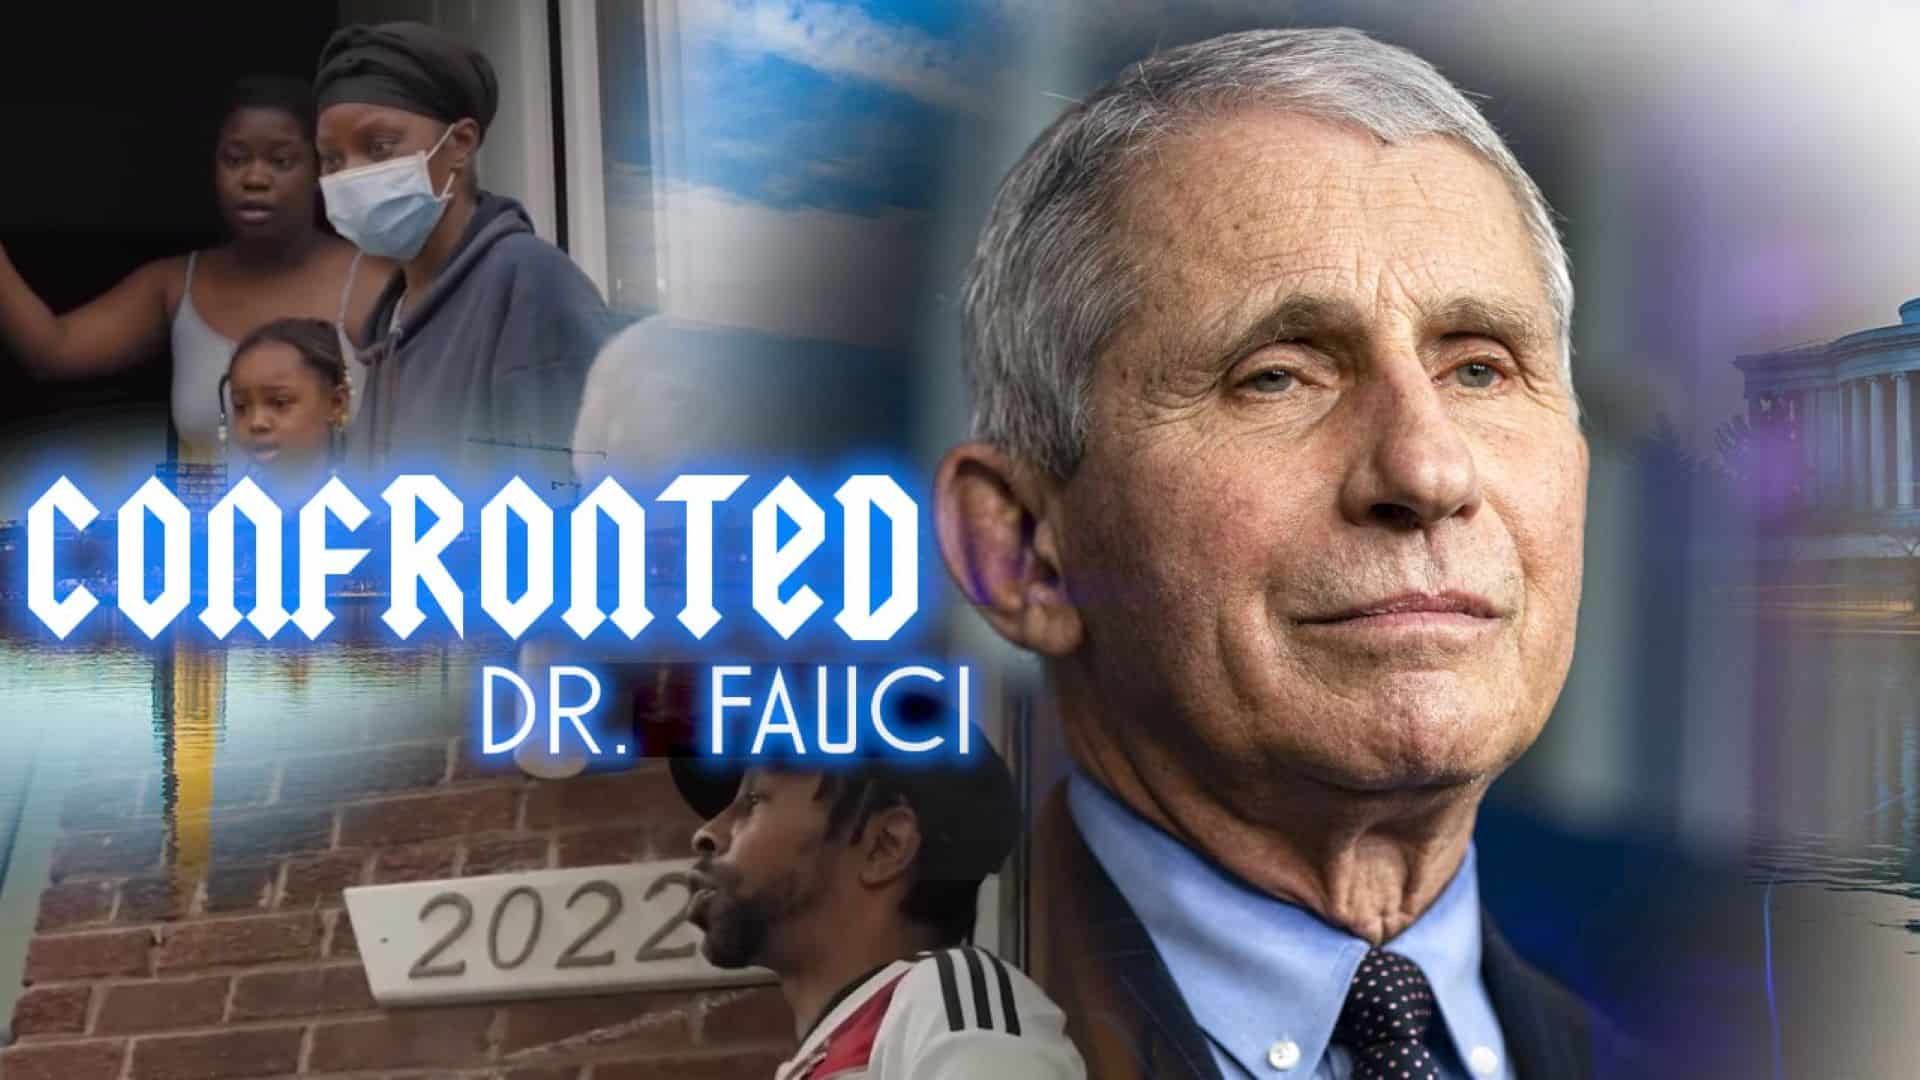 Black D.C. Residents Confront Dr. Fauci In The Streets